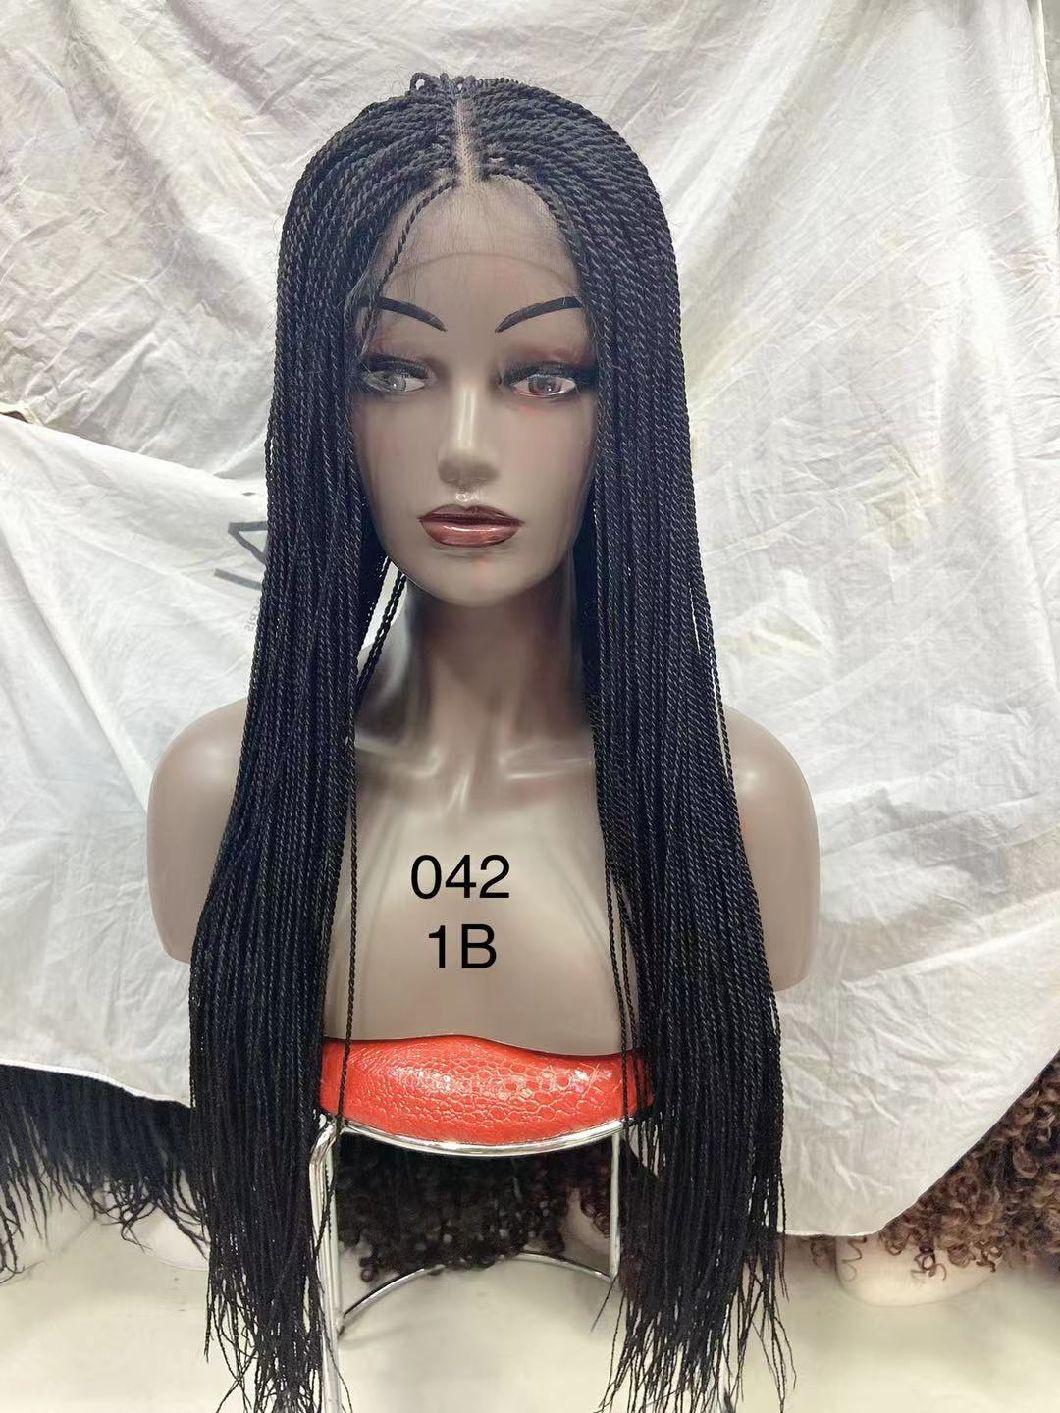 Synthetic Braided Lace Wig, Frontal Braided Wigs, Full Lace Braided Wig